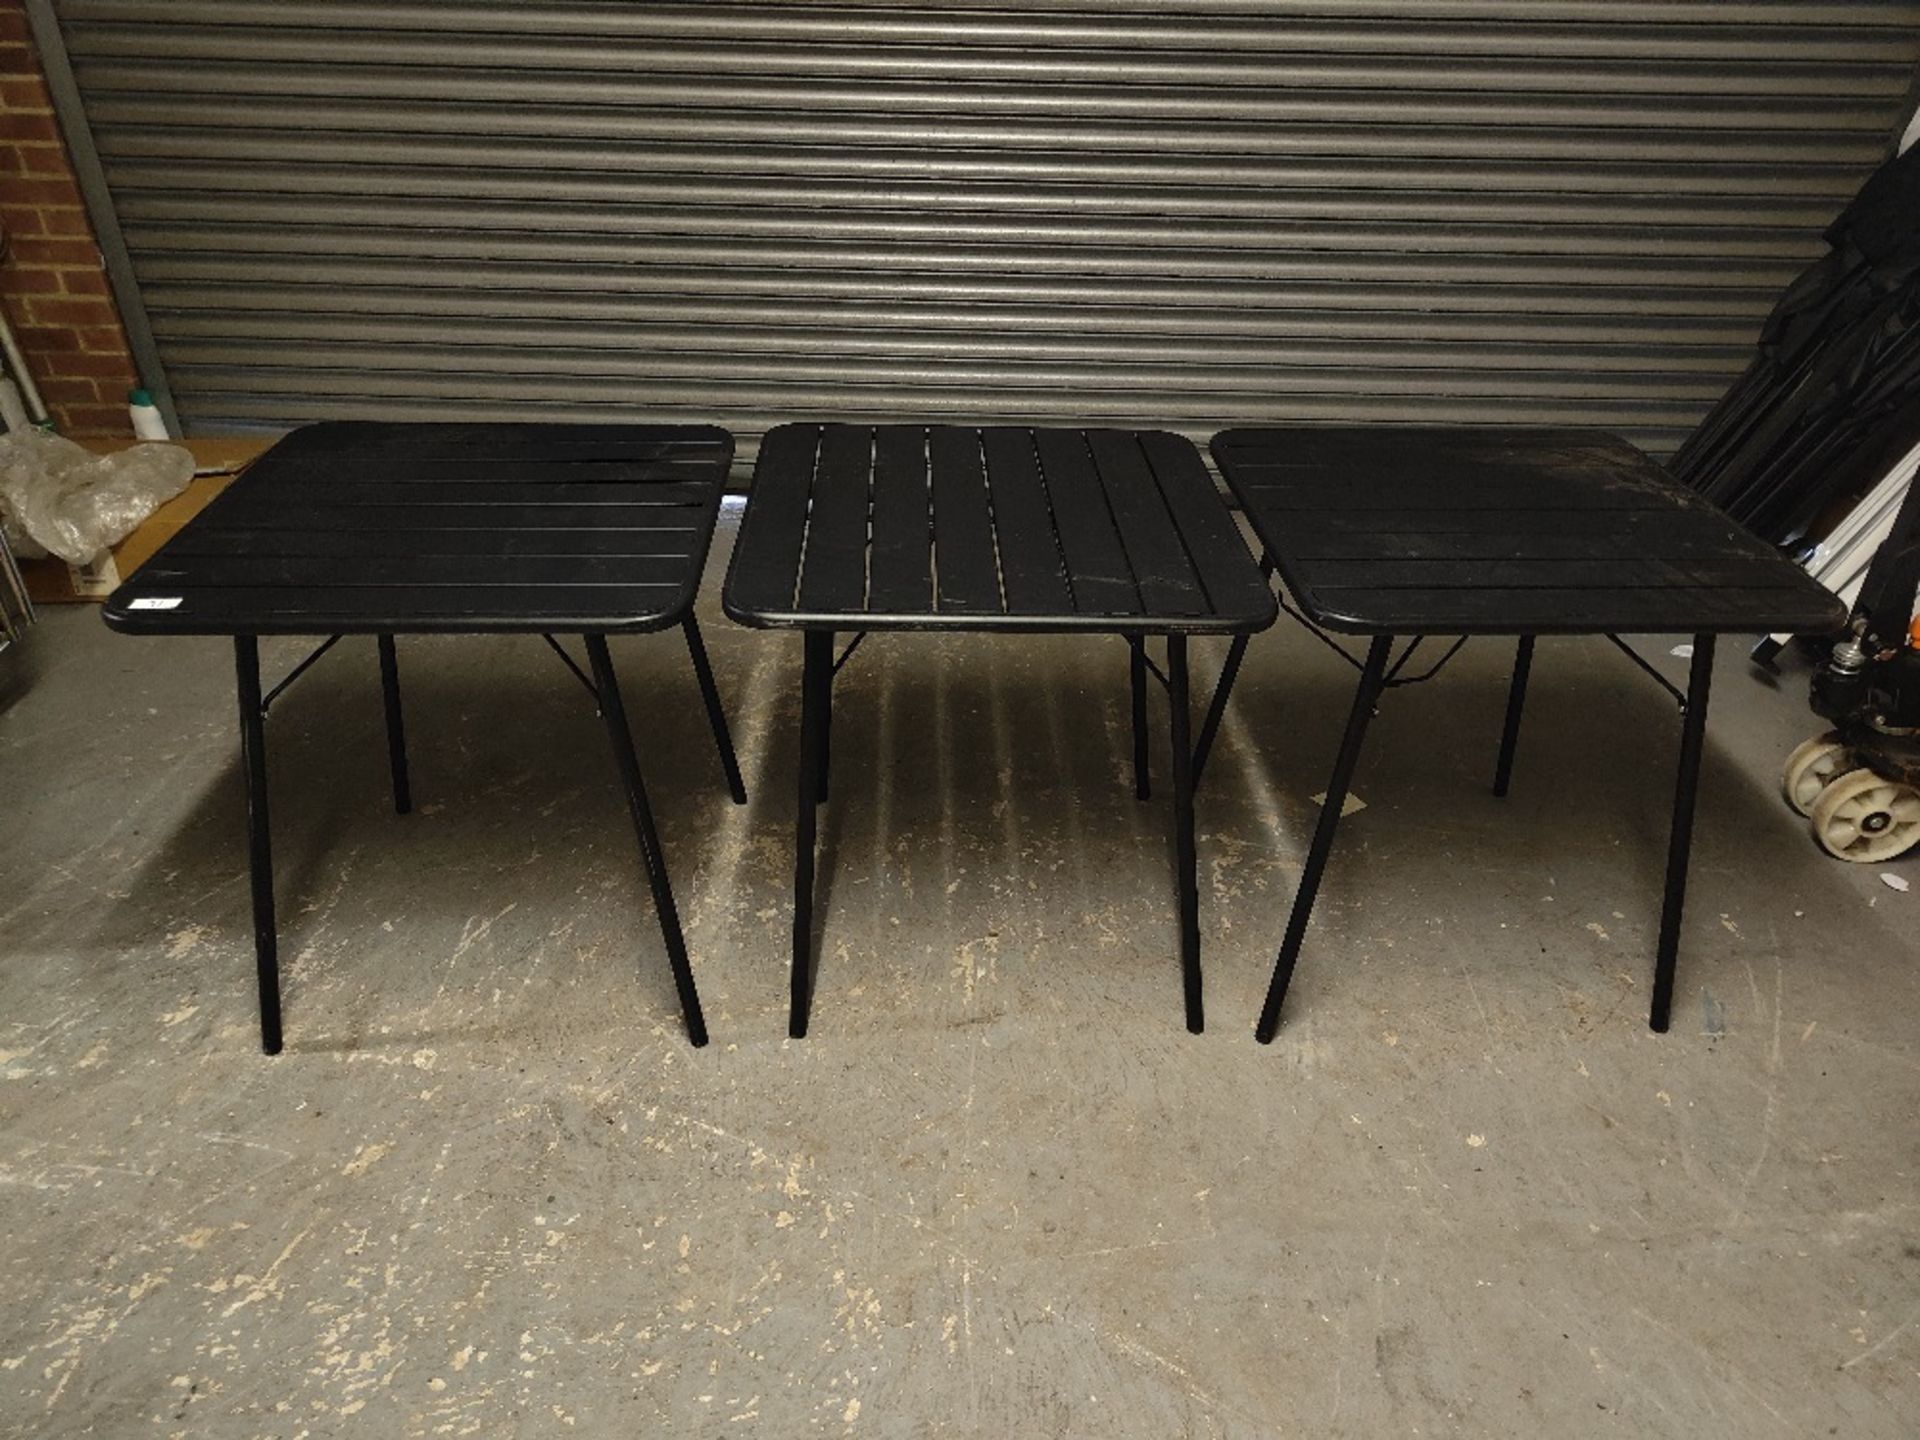 (3) Metal Colapsible Two Person Dining Tables